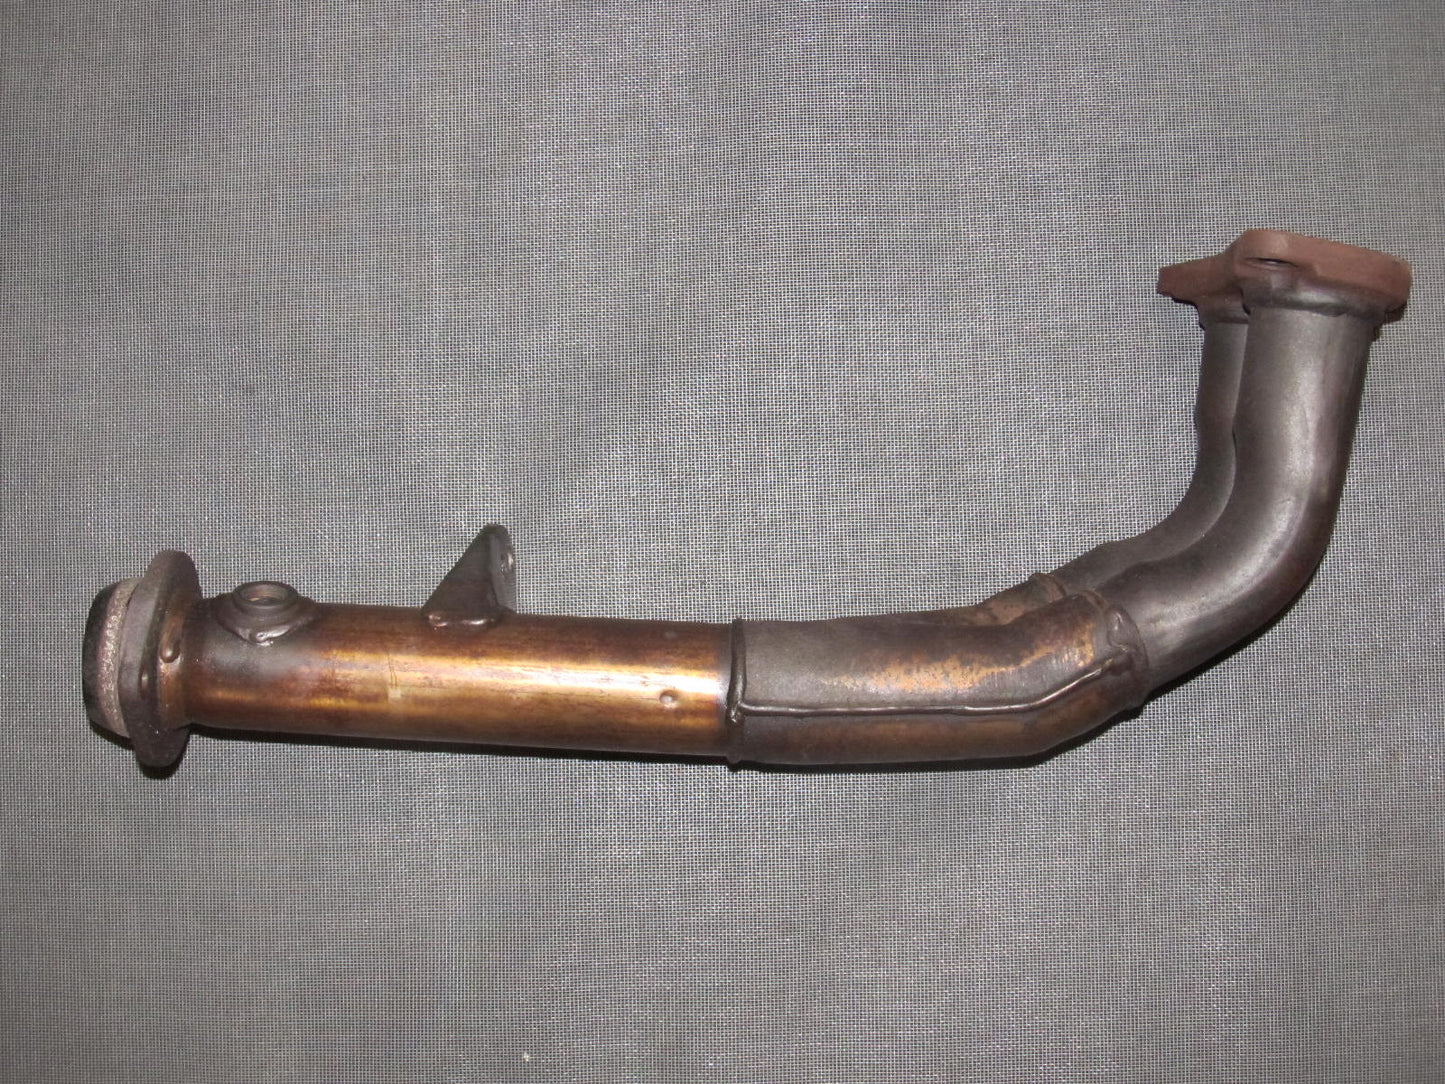 94-01 Acura Integra OEM Exhaust Manifold Front Pipe